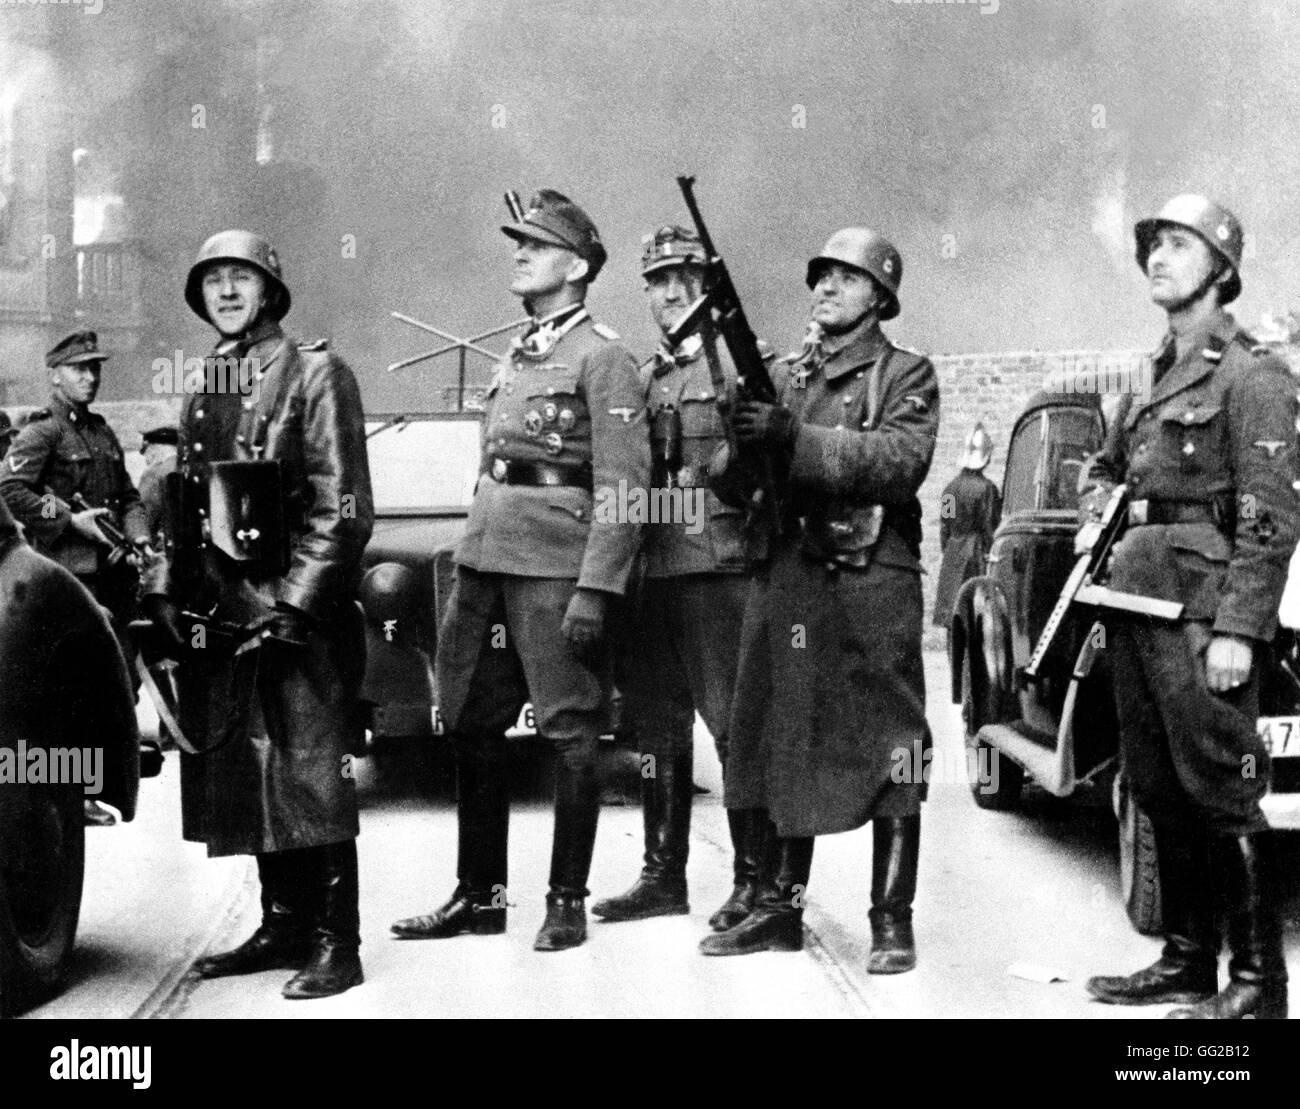 Warsaw ghetto: SS Major General Jürgen Stroop with his troops 20th century Poland, Second World War war Centre de documentation juive Stock Photo